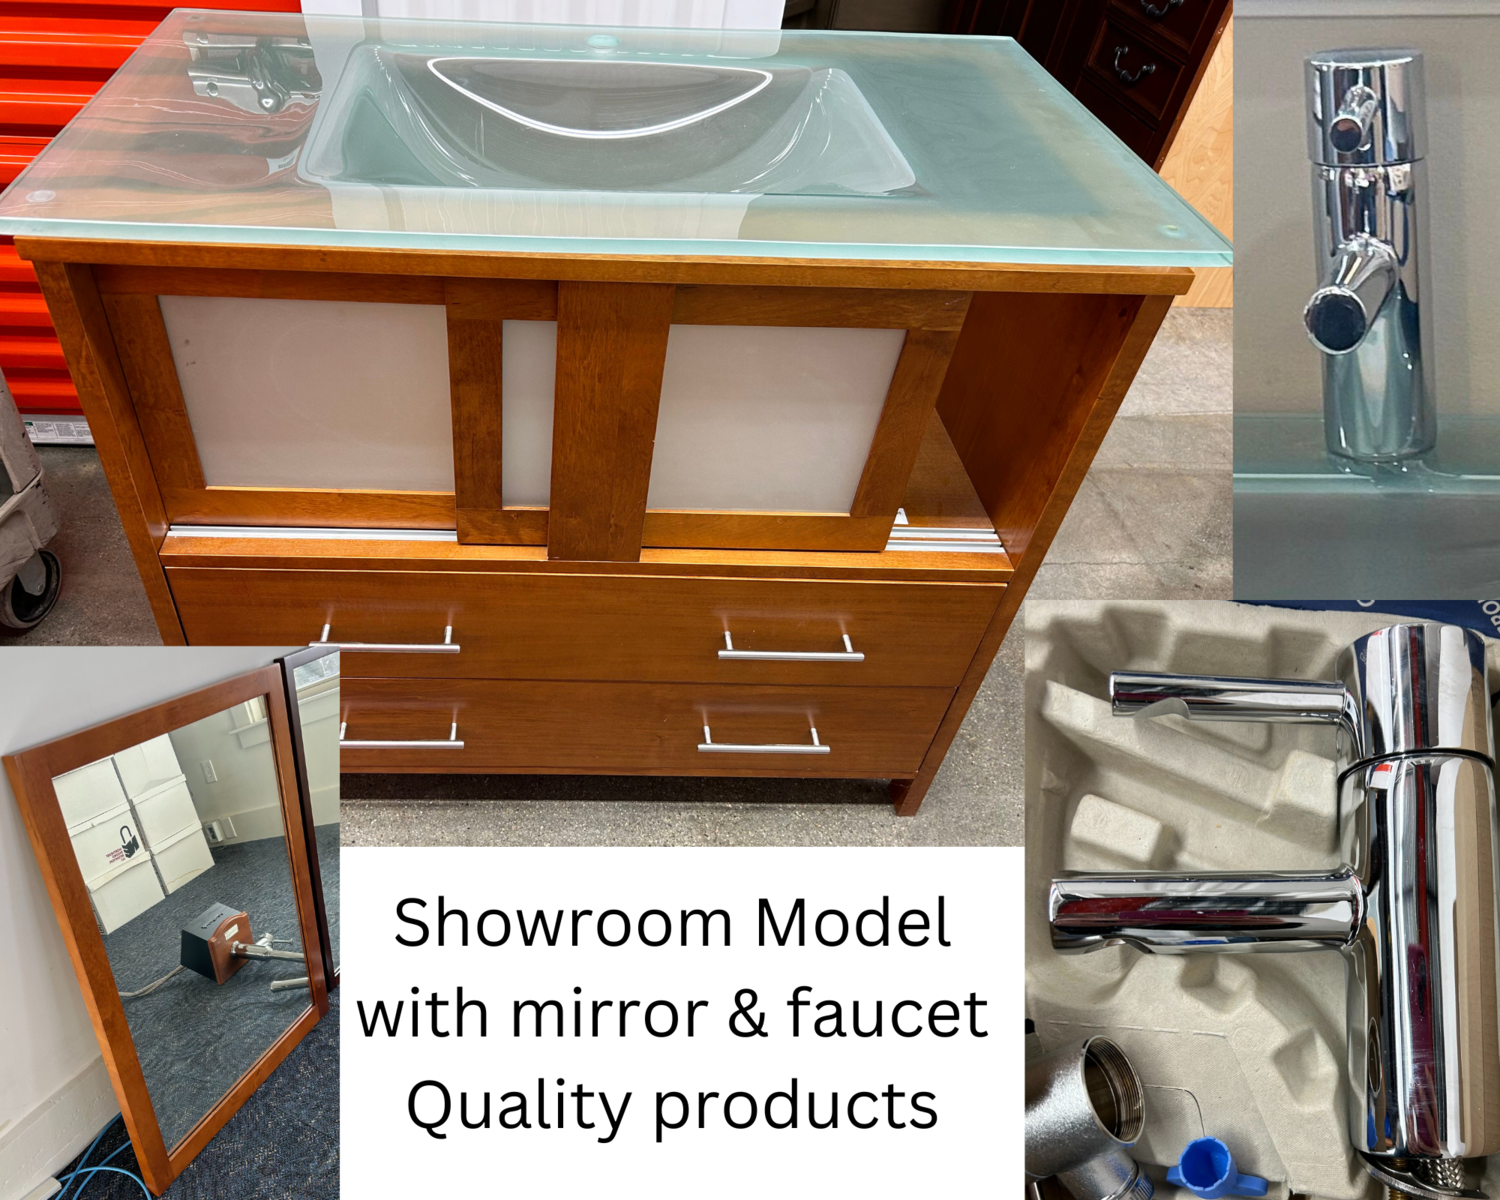 High-end 36" Bathroom Vanity, glass top, w/ mirror & faucet ** new price #1048 ** 2 mos. to sell, clearance & 30% off